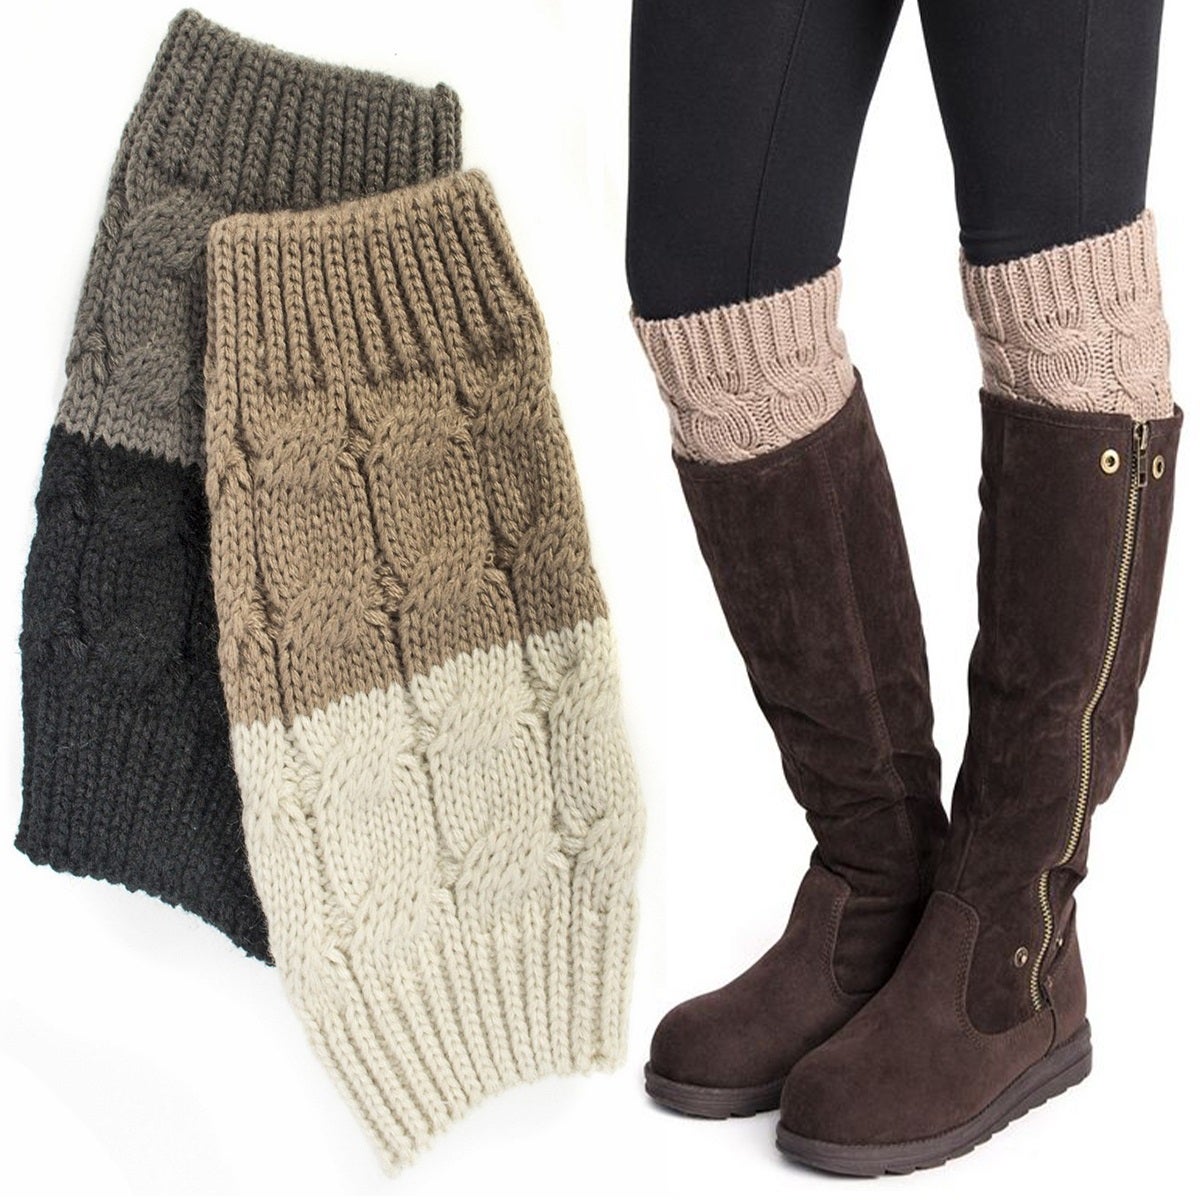 2pk Muk Luks Women’s Knit Boot Toppers – 4 Different Cute Looks!